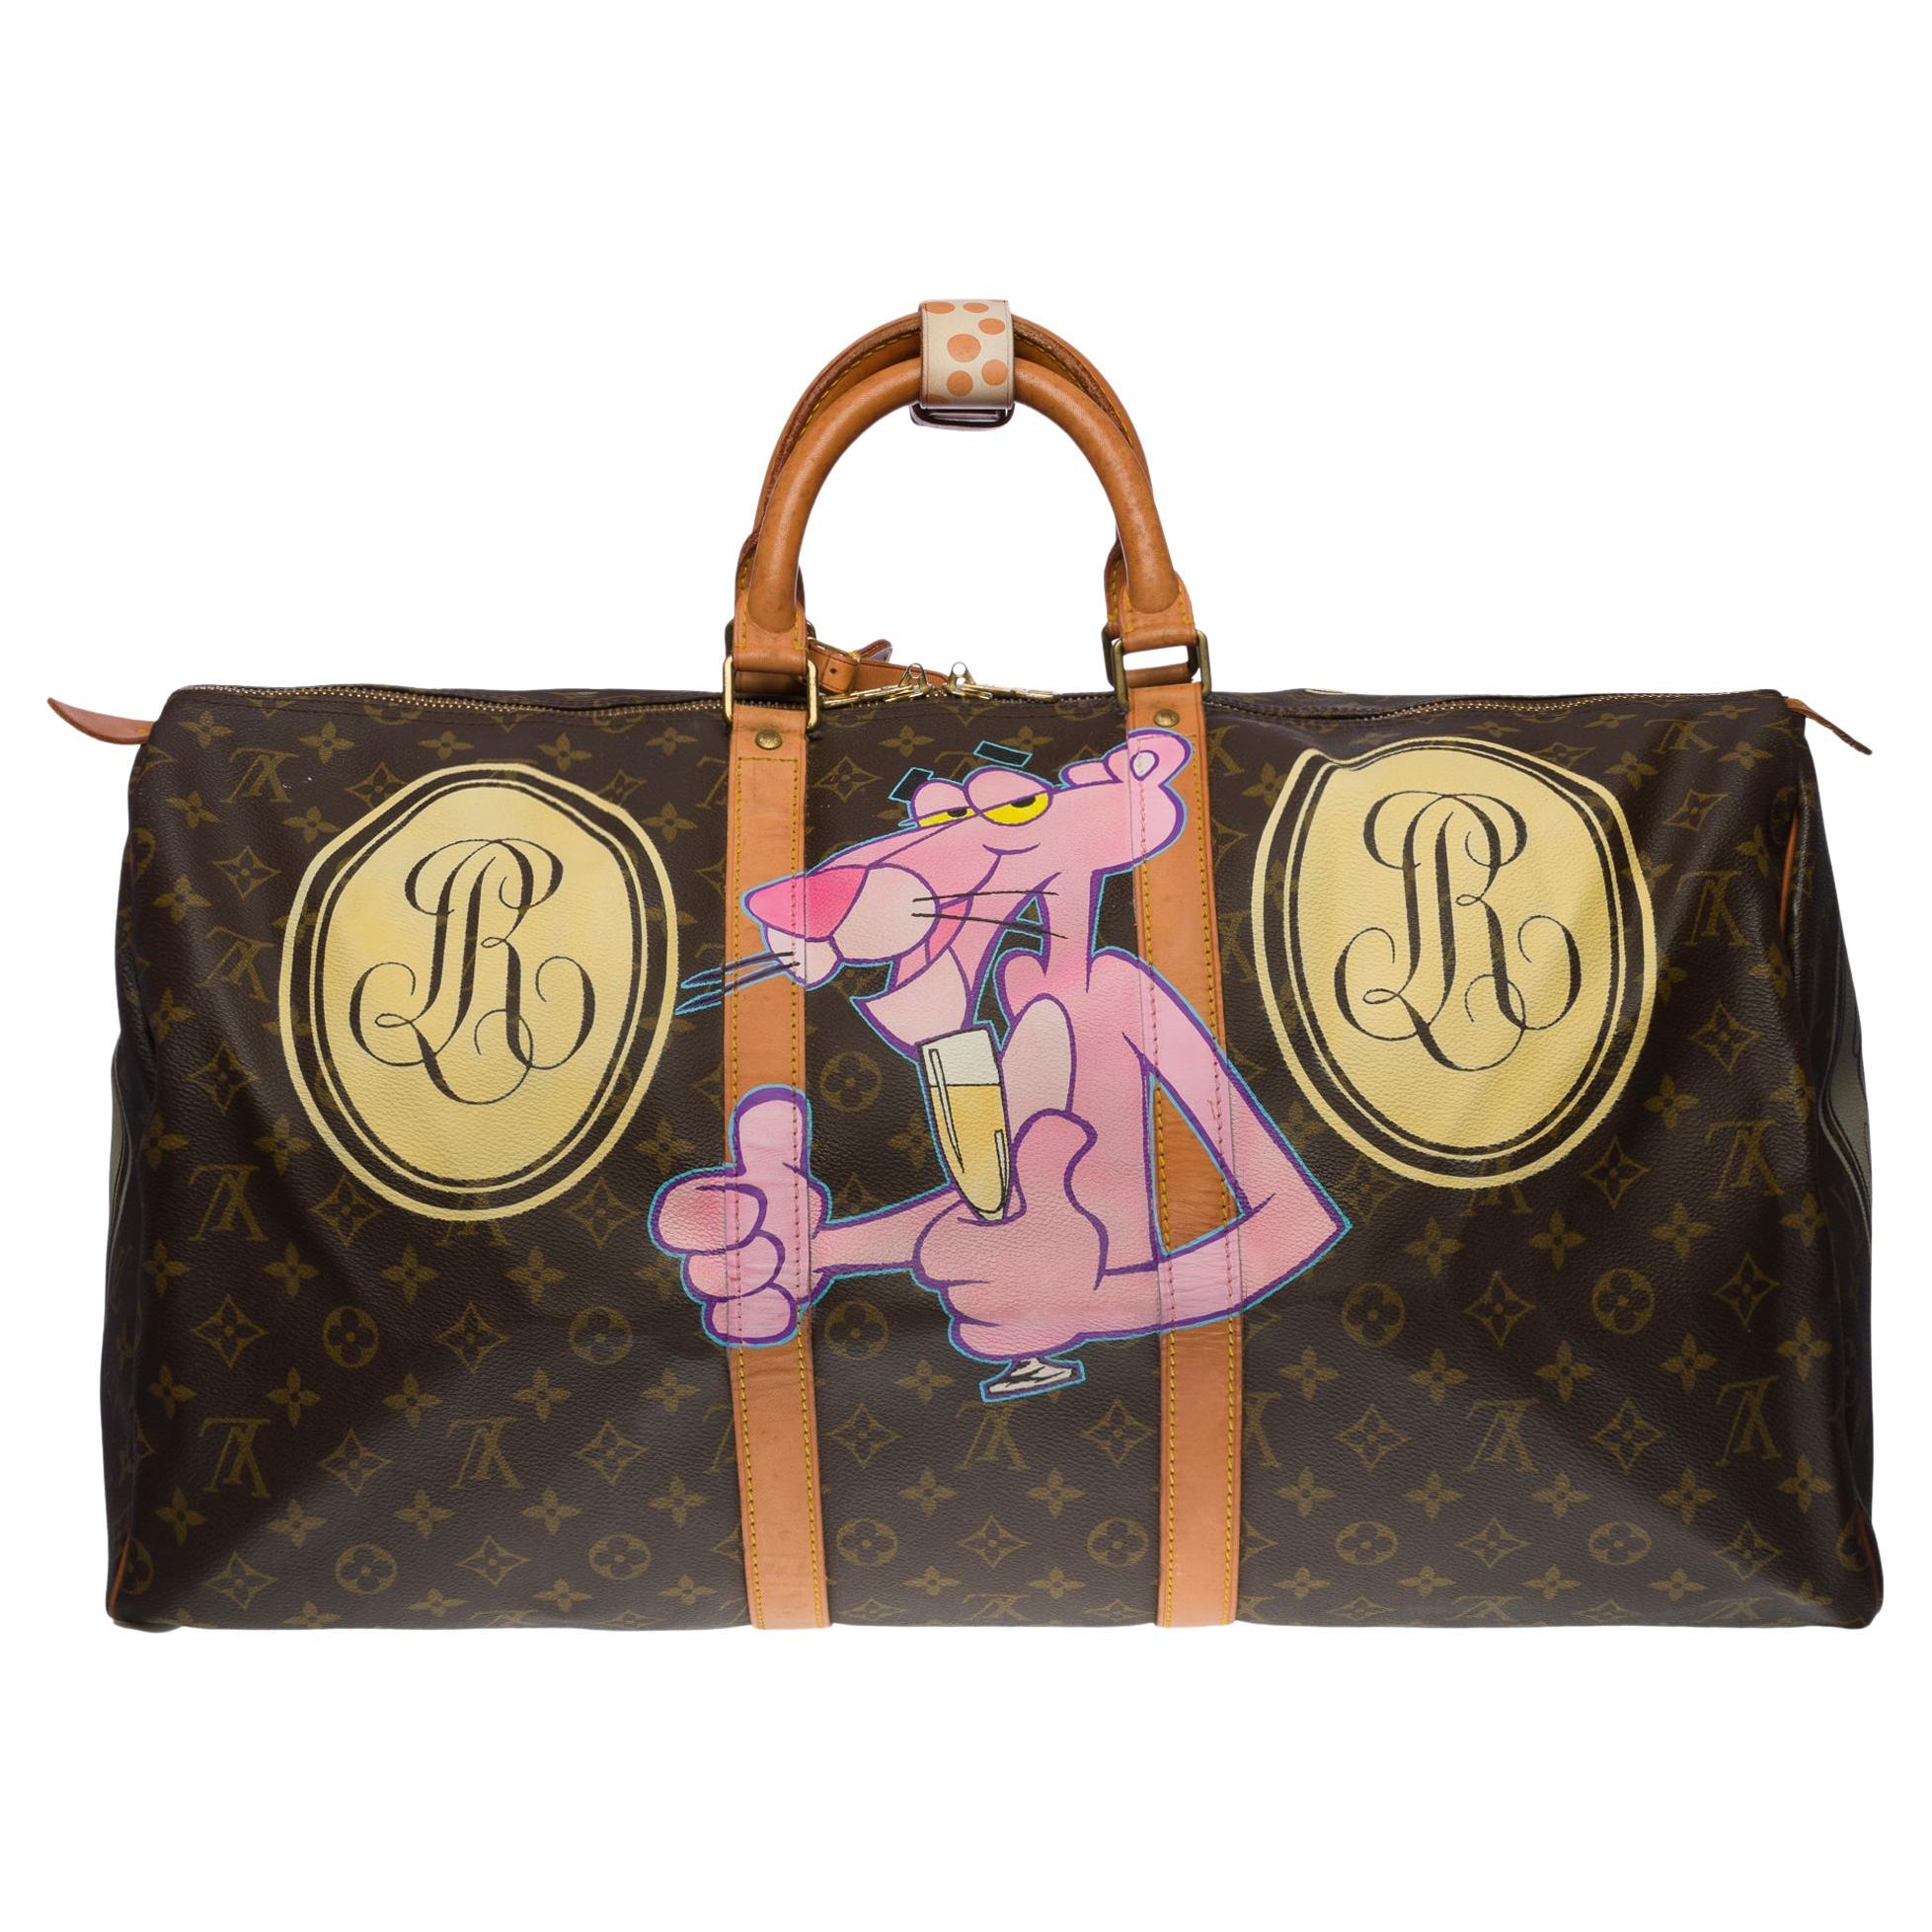 Superb Louis Vuitton Keepall 55 cm travel bag in Monogram canvas customized by the fashionable artist of Street Art PatBo 